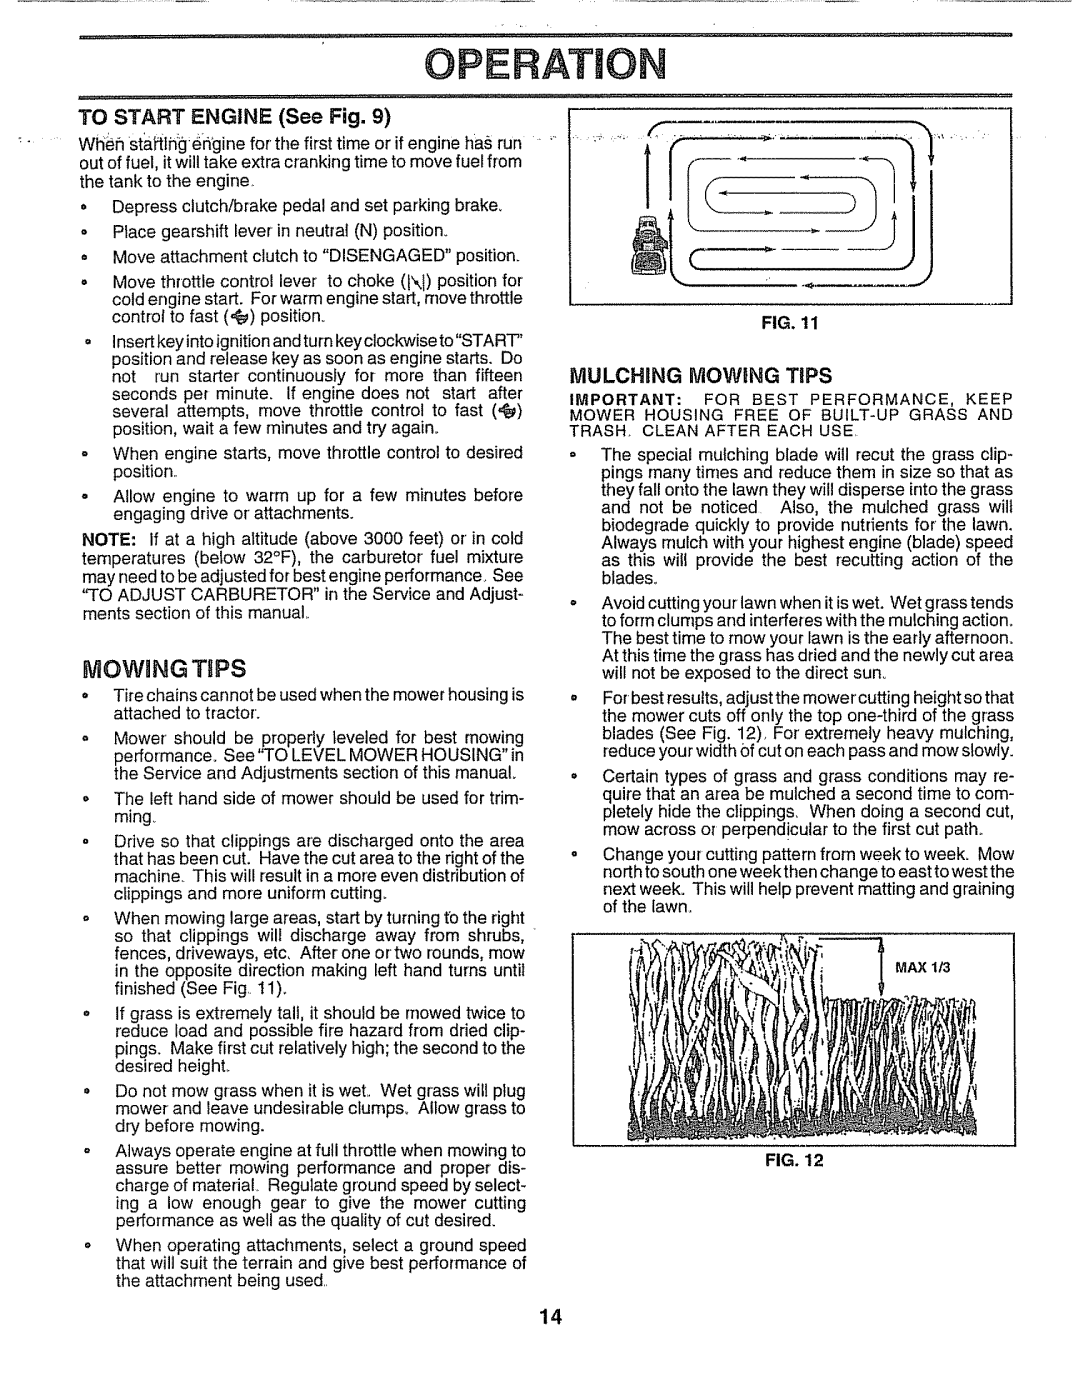 Sears 917.257552 manual Operat O, Mowungtips, TO START ENGINE See Fig, MULCHING MOWING TiPS 